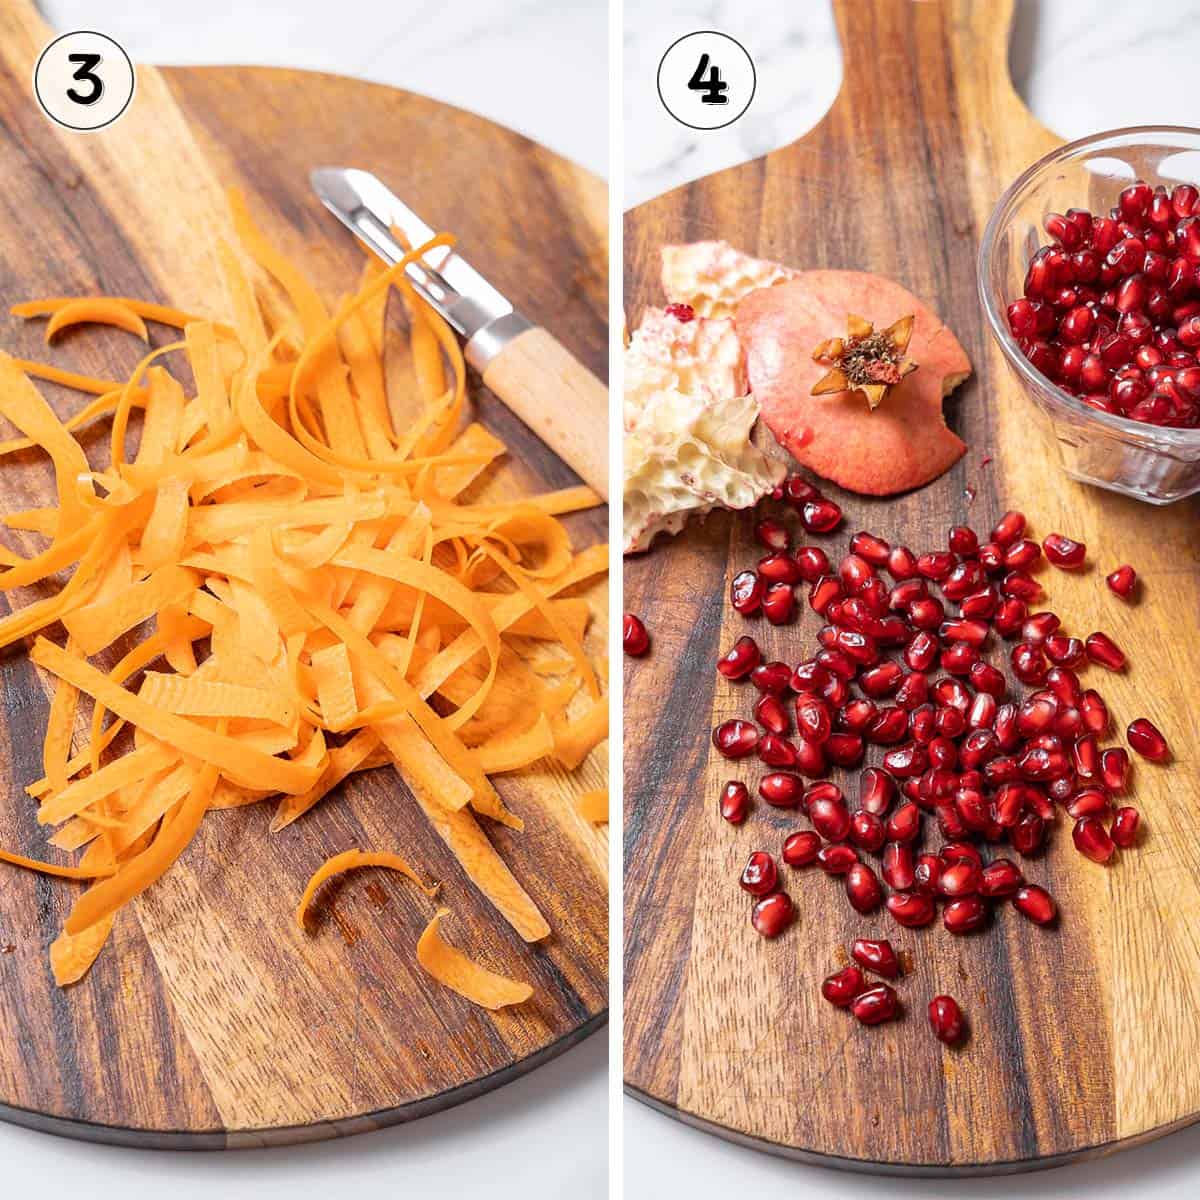 prepping the carrot and pomegranate.